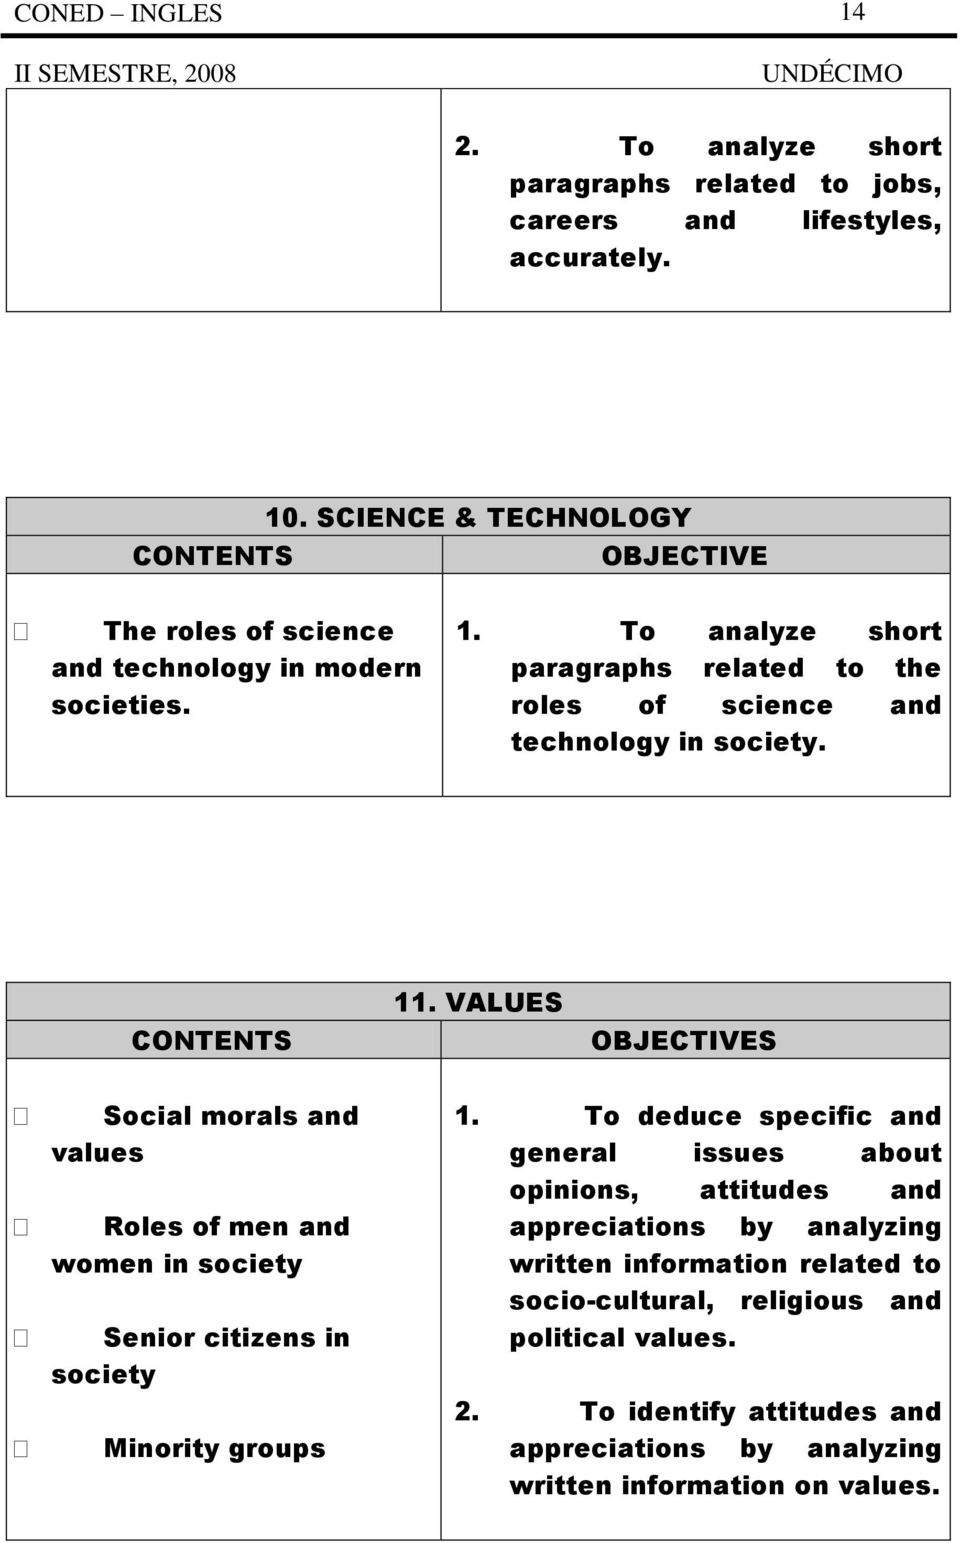 To analyze short paragraphs related to the roles of science and technology in society. CONTENTS 11.